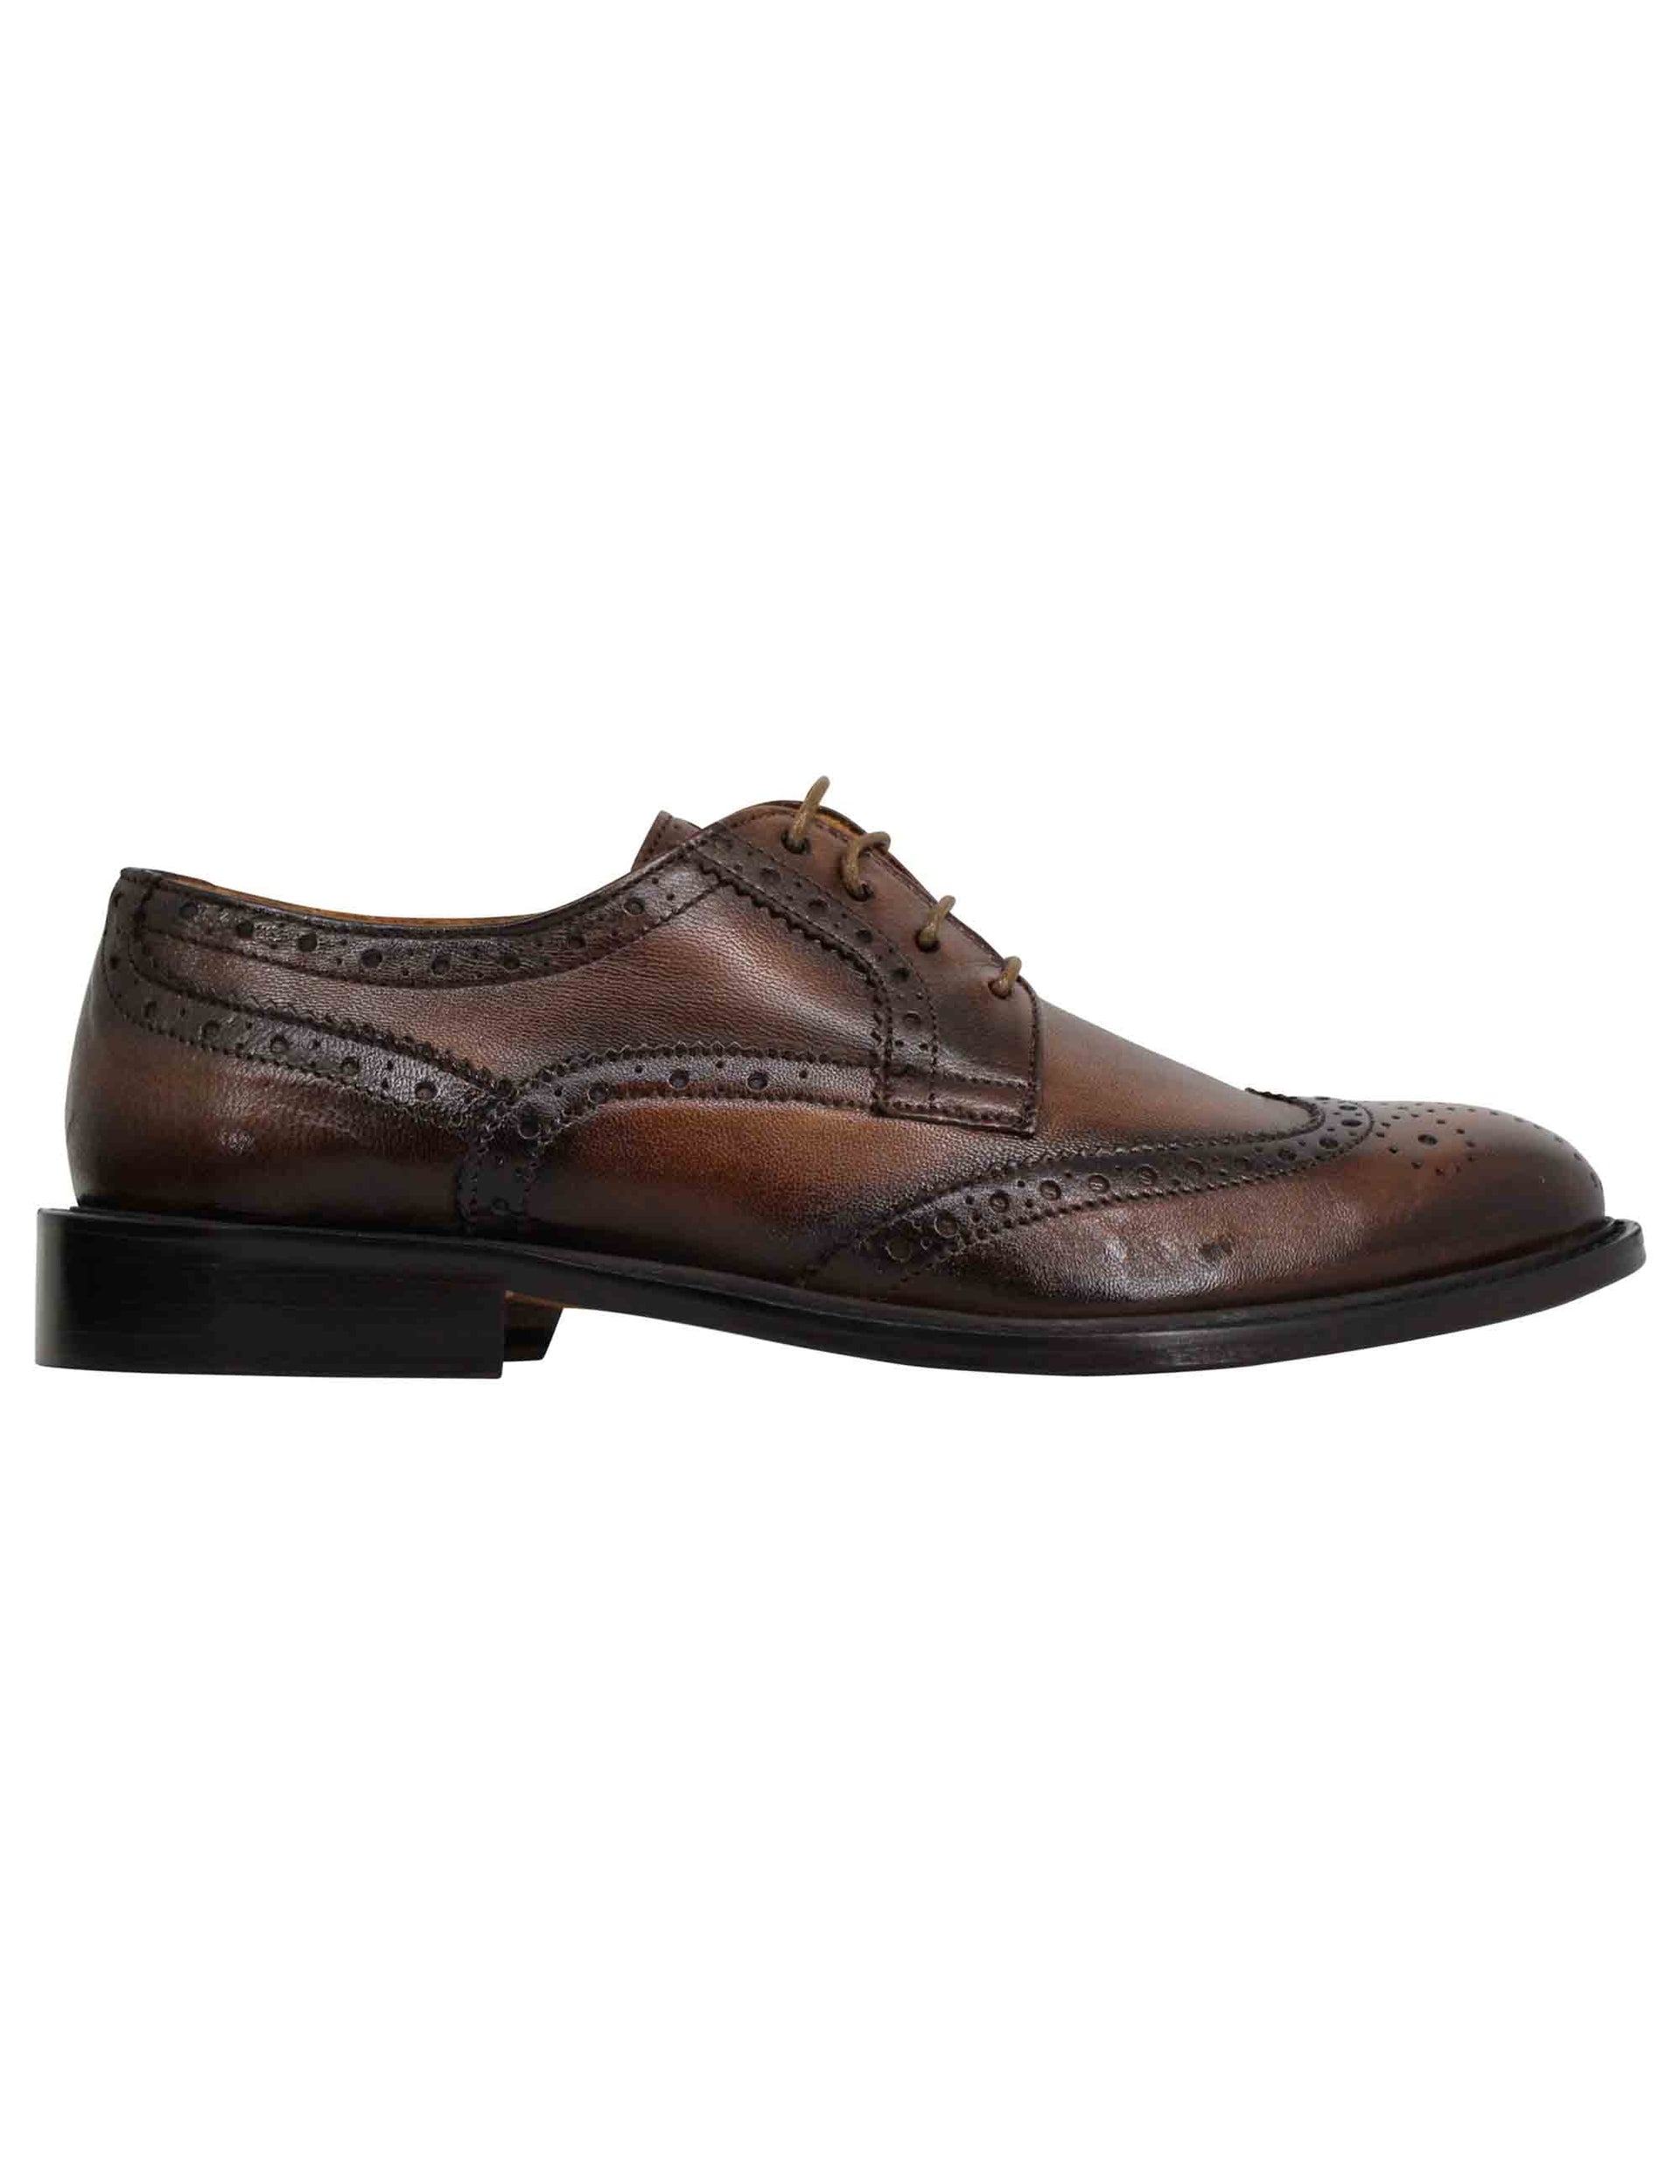 Men's lace-ups in stitched brown leather with stitched leather sole